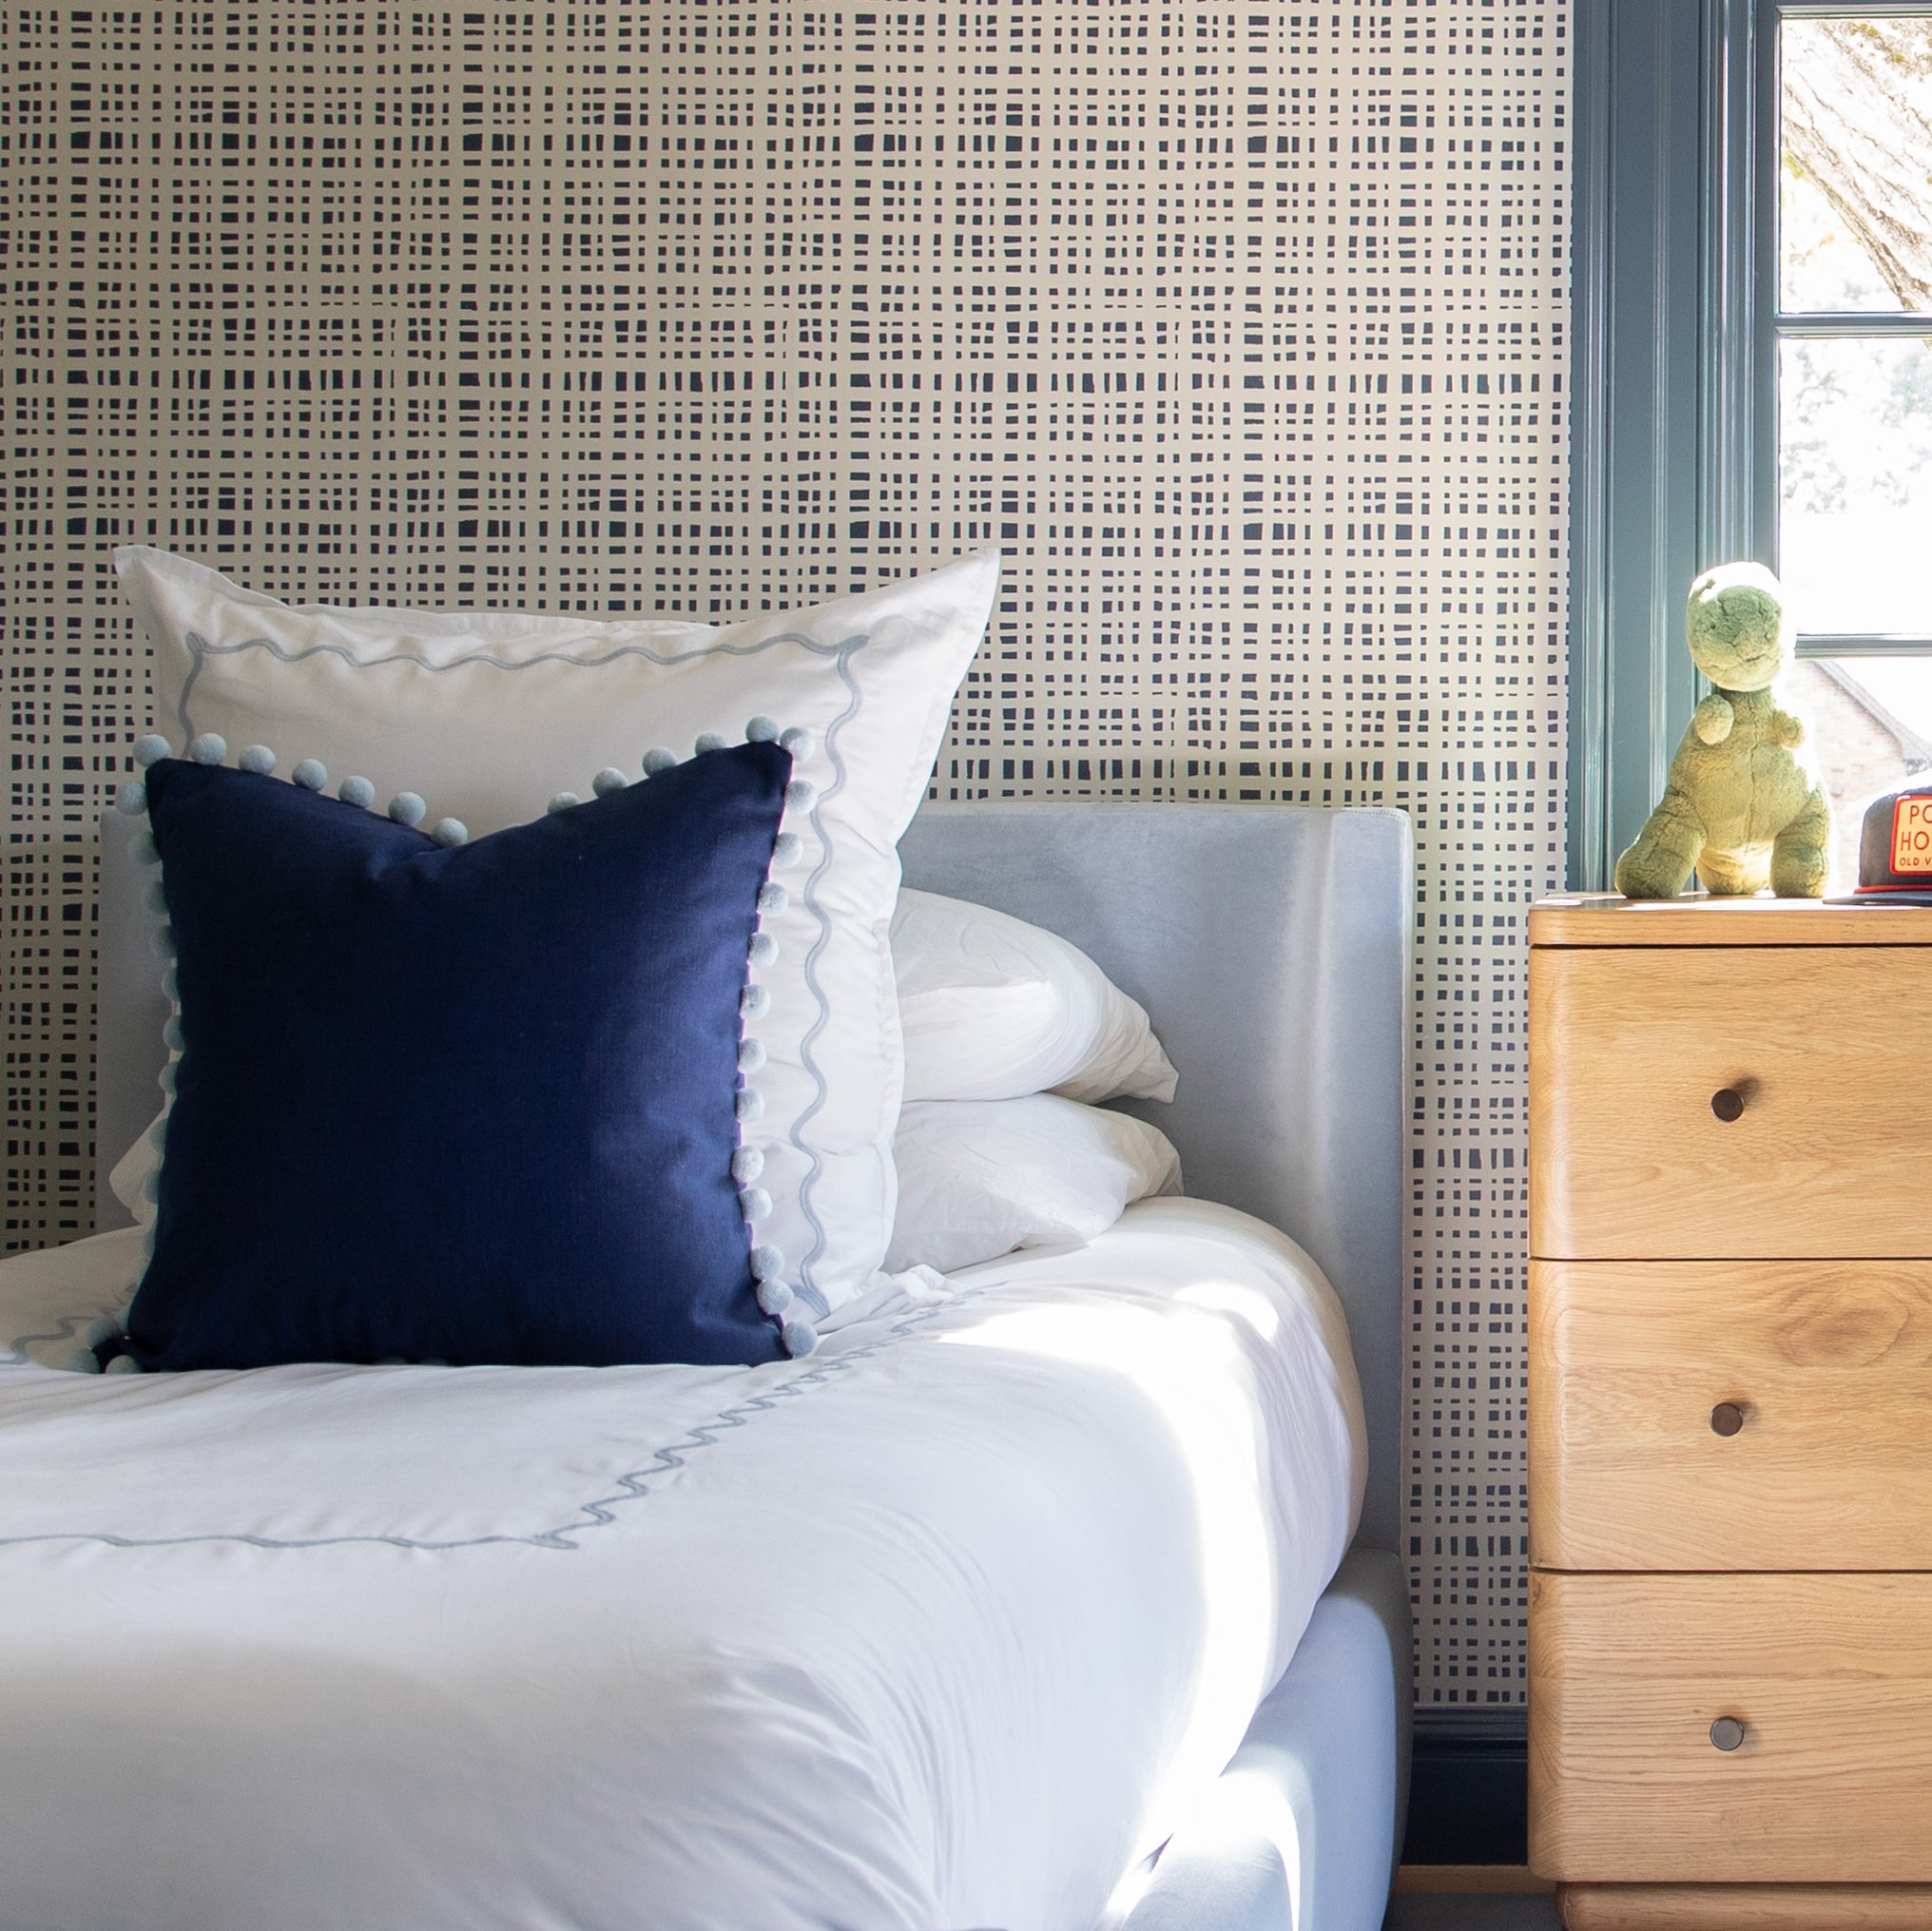 Bedroom styled with navy gingham printed wallpaper and navy blue pillow with sky blue pom pom on white bed by wooden dresser in front of window